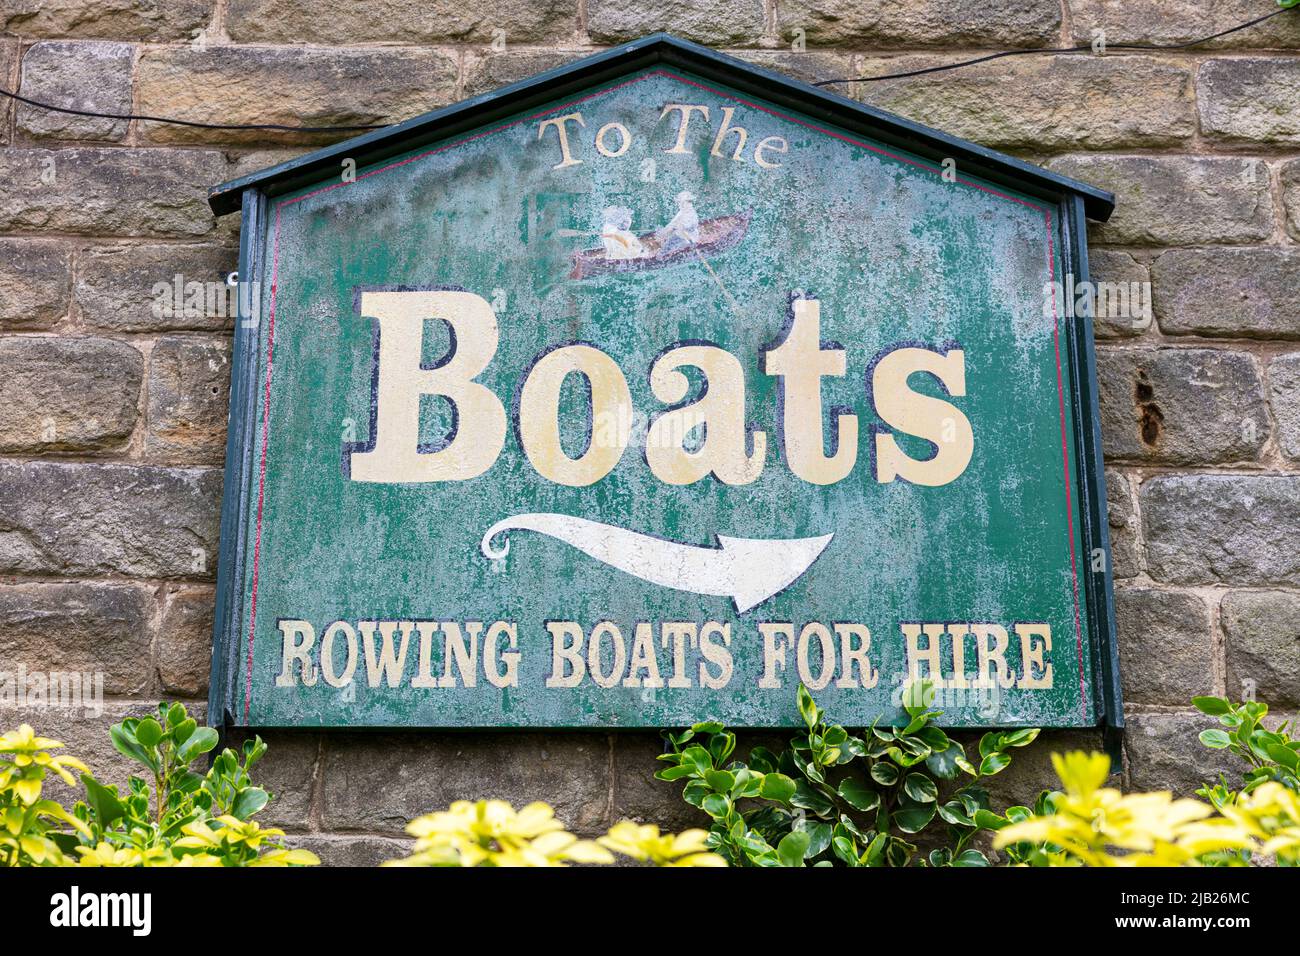 Knaresborough Town, Yorkshire, UK, England,to the boats, rowing boats for hire,rustic,sign,rustic sign,green,boats,boat hire,boats for hire,old sign, Stock Photo